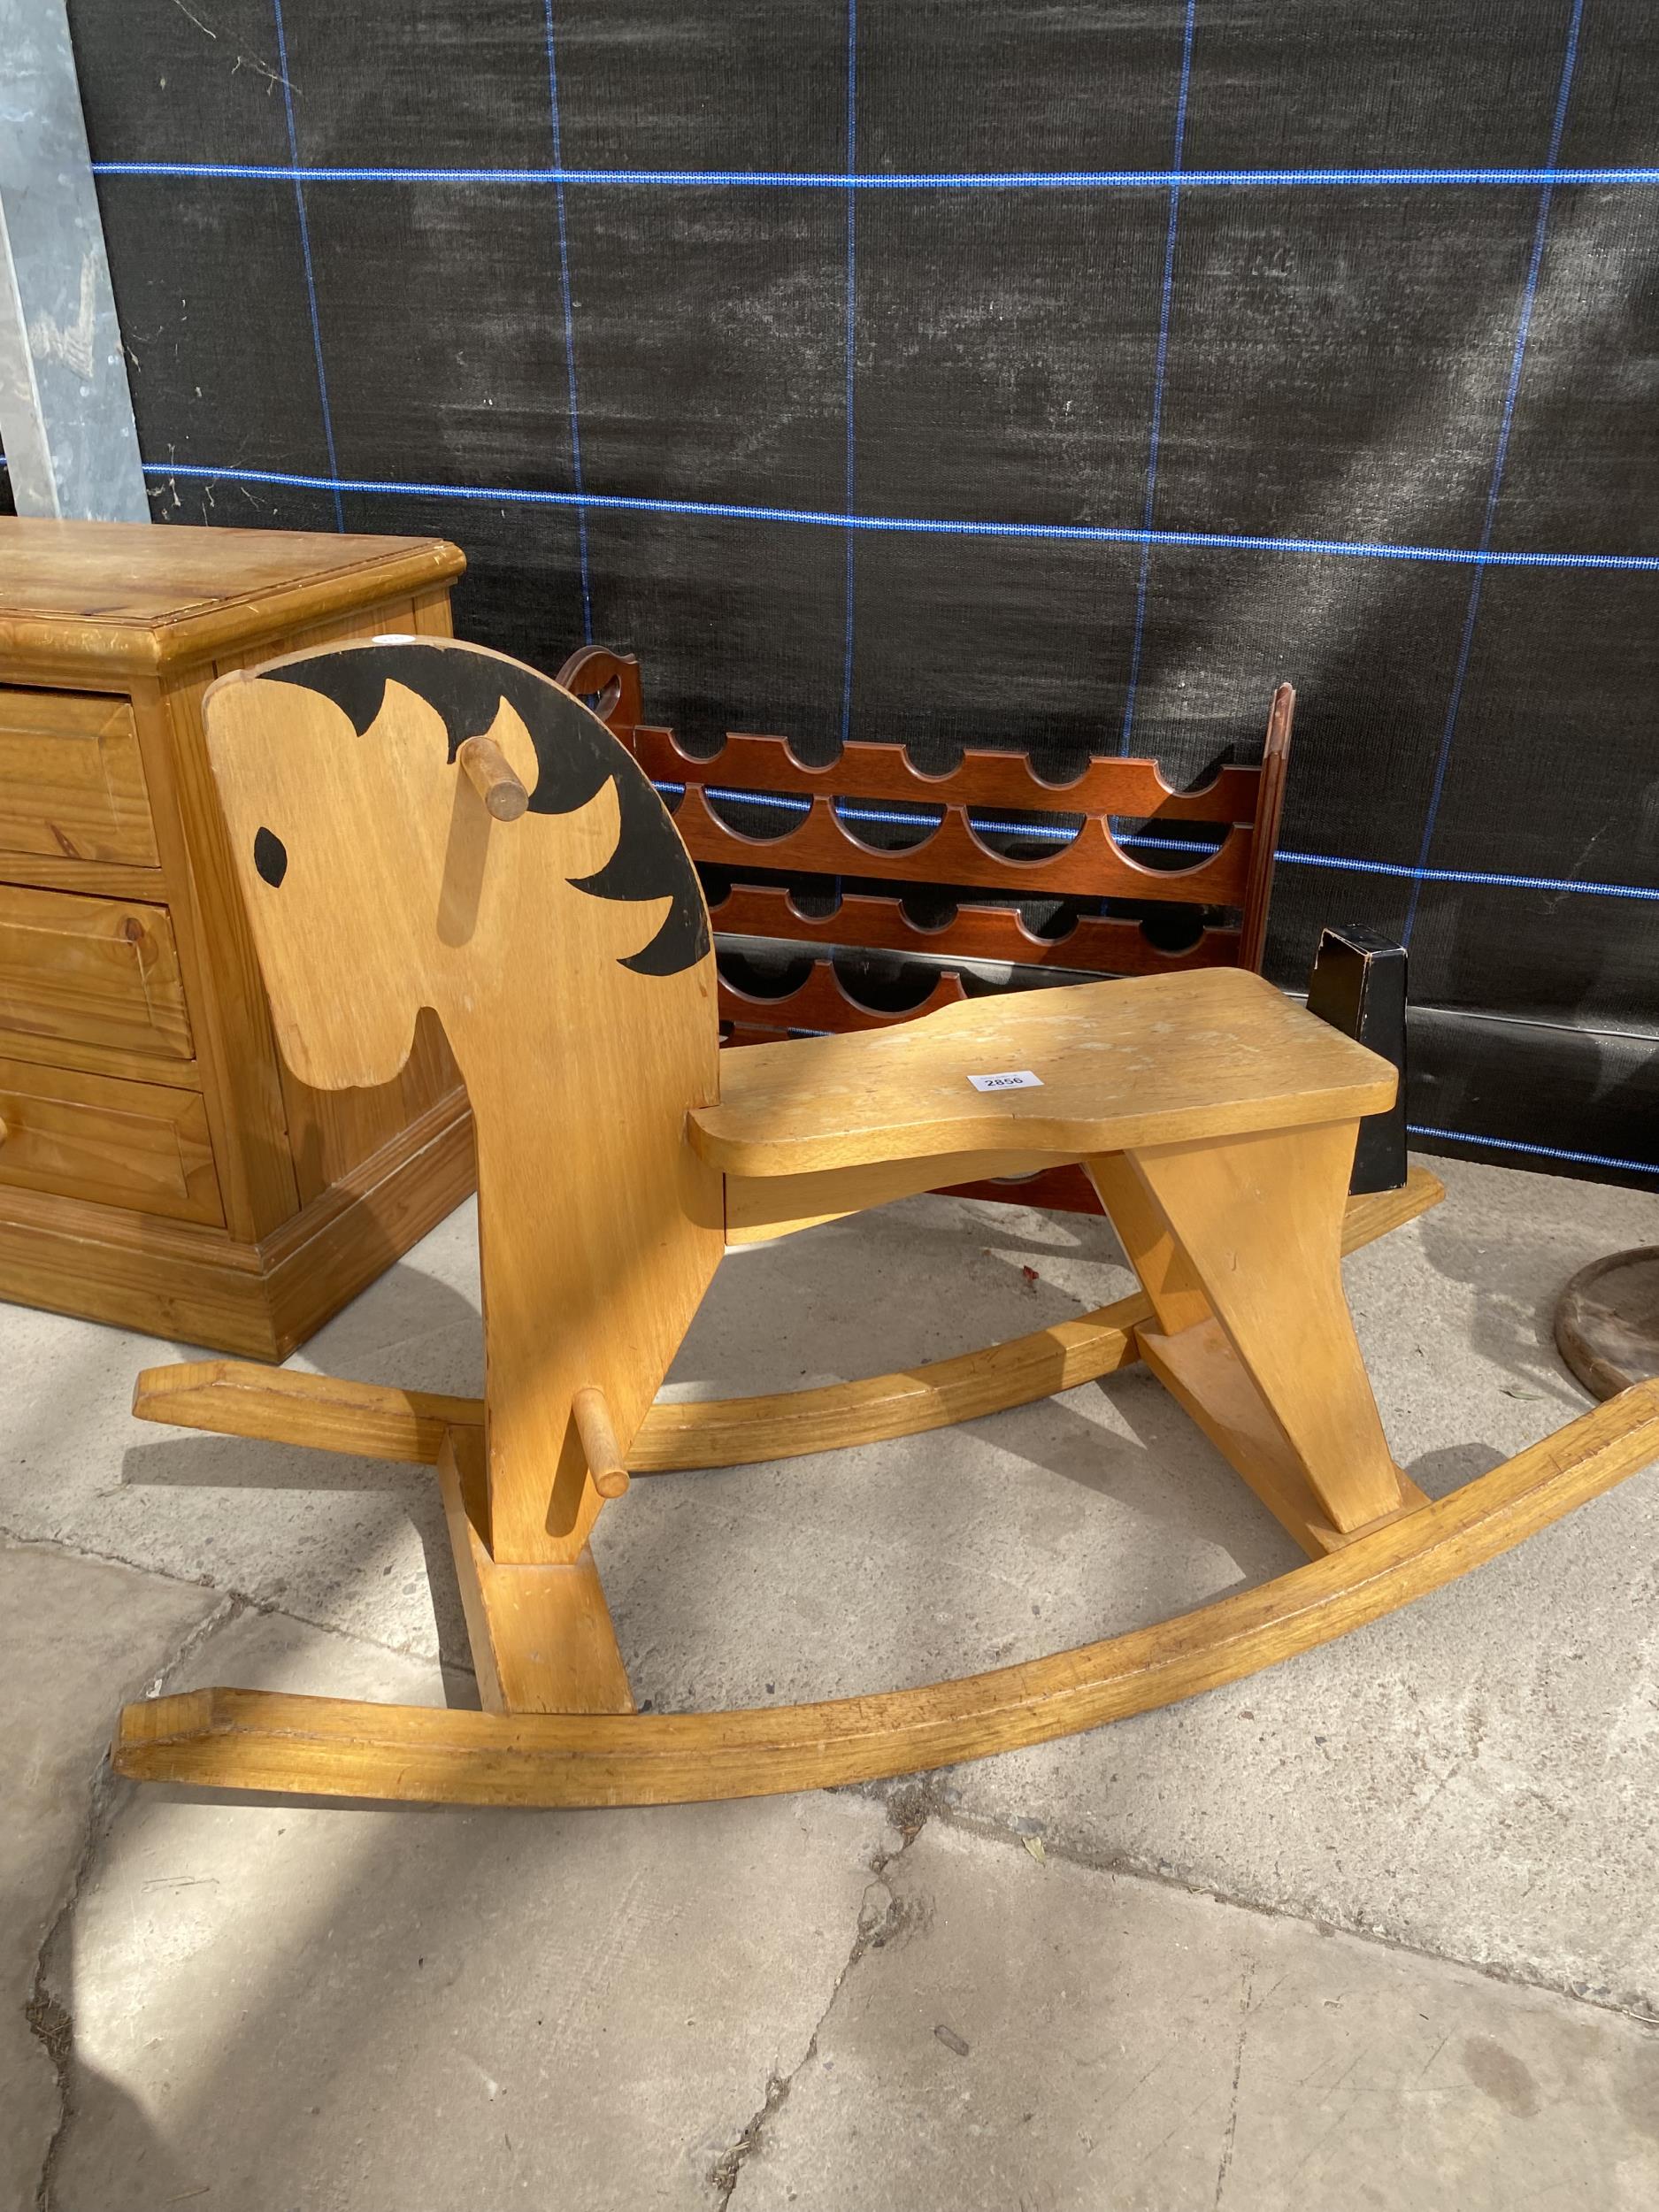 A MODERN HARDWOOD ROCKING HORSE/CHAIR AND FIFTEEN BOTTLE WINE RACK - Image 3 of 3